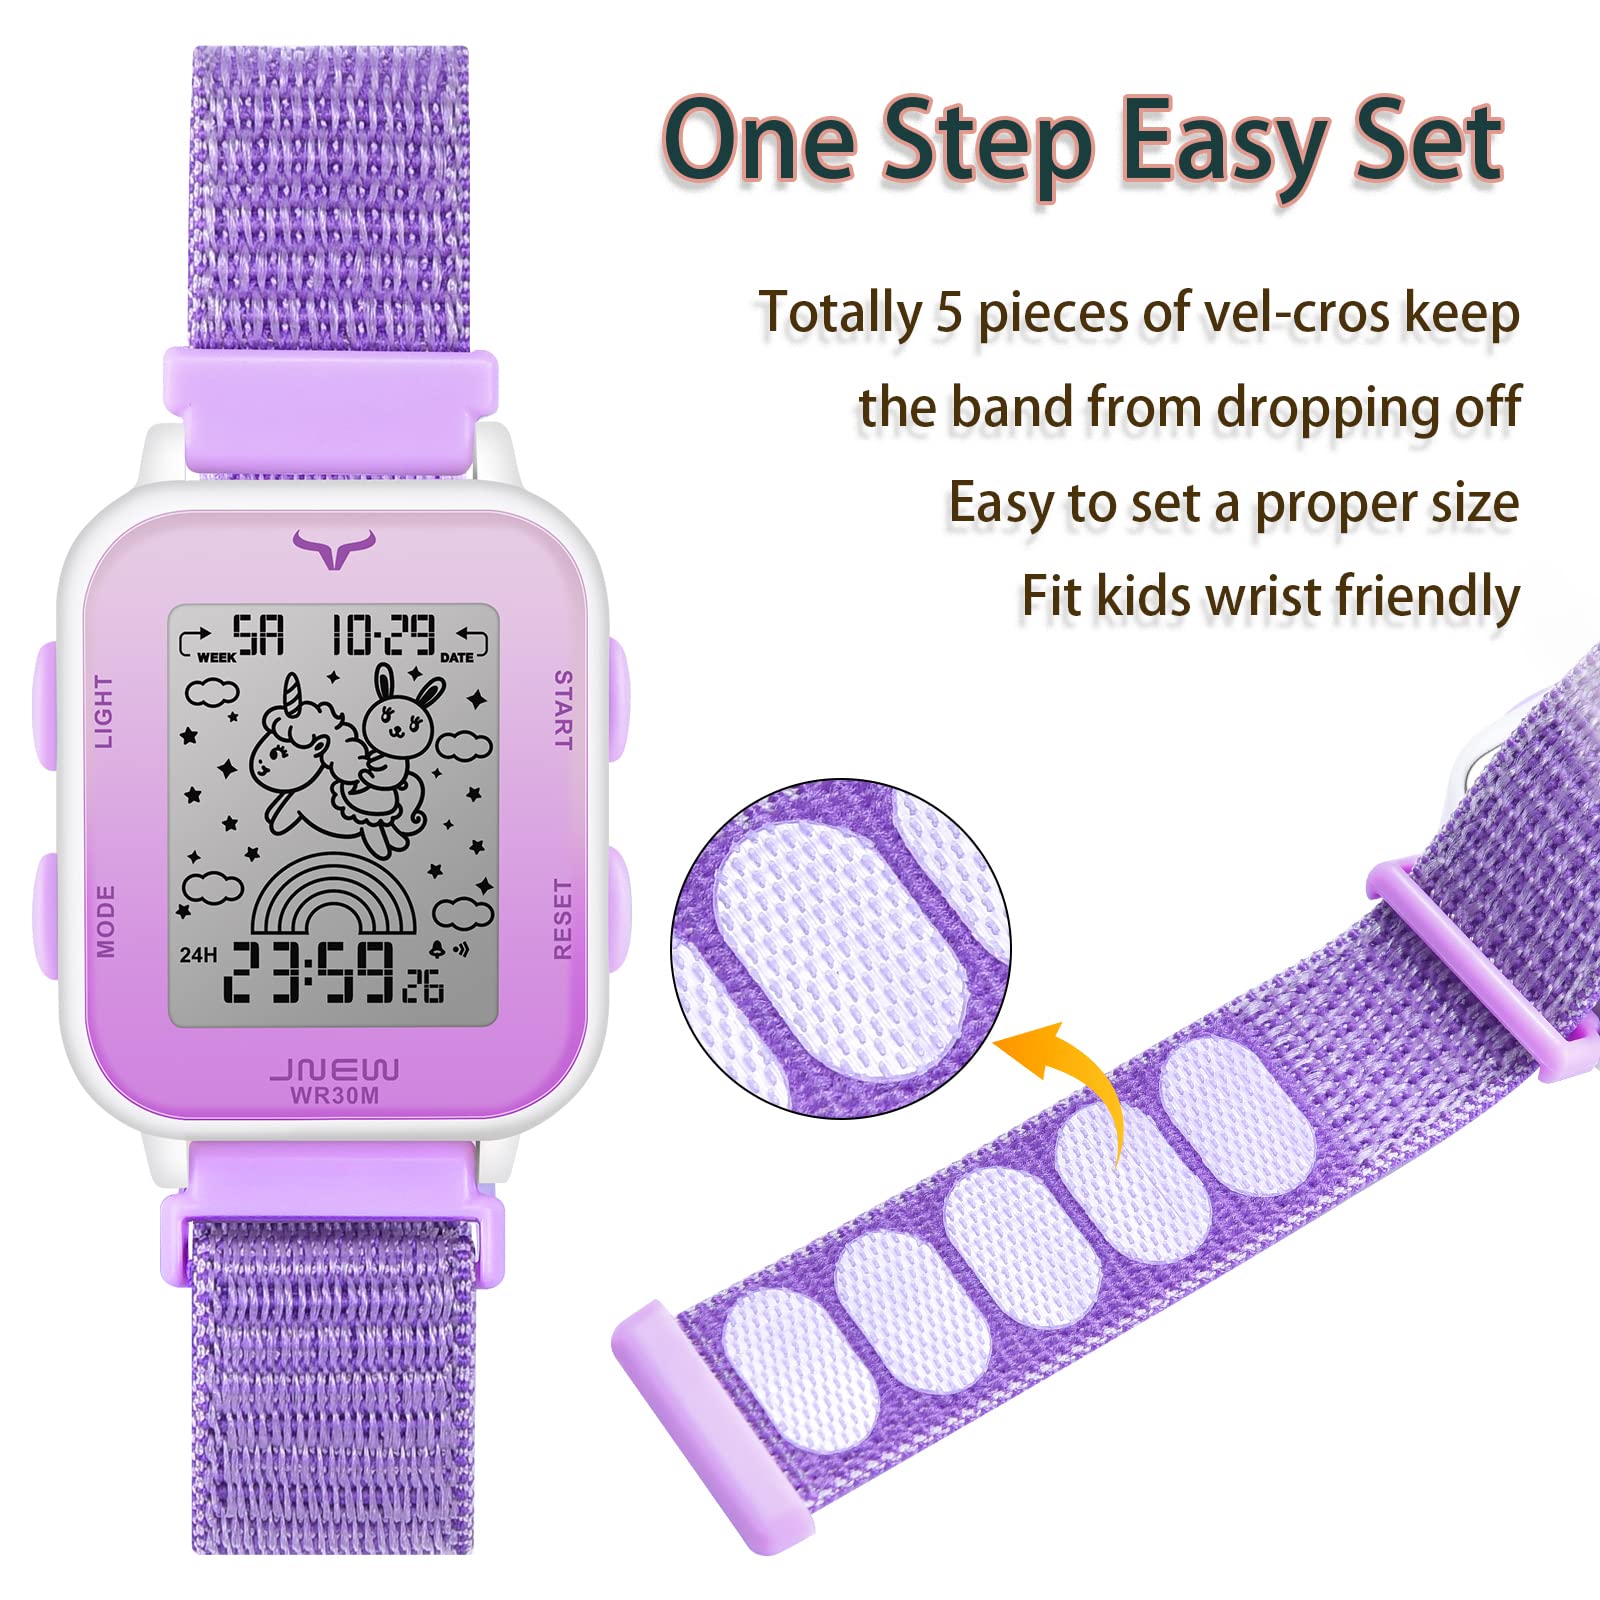 Venhoo Kids Digital Watch Outdoor Sport Woven Nylon Strap 7 Colorful LED Electrical Wrist Watches with Alarm Luminous Stopwatch for Little Girls Child-Purple Unicorn